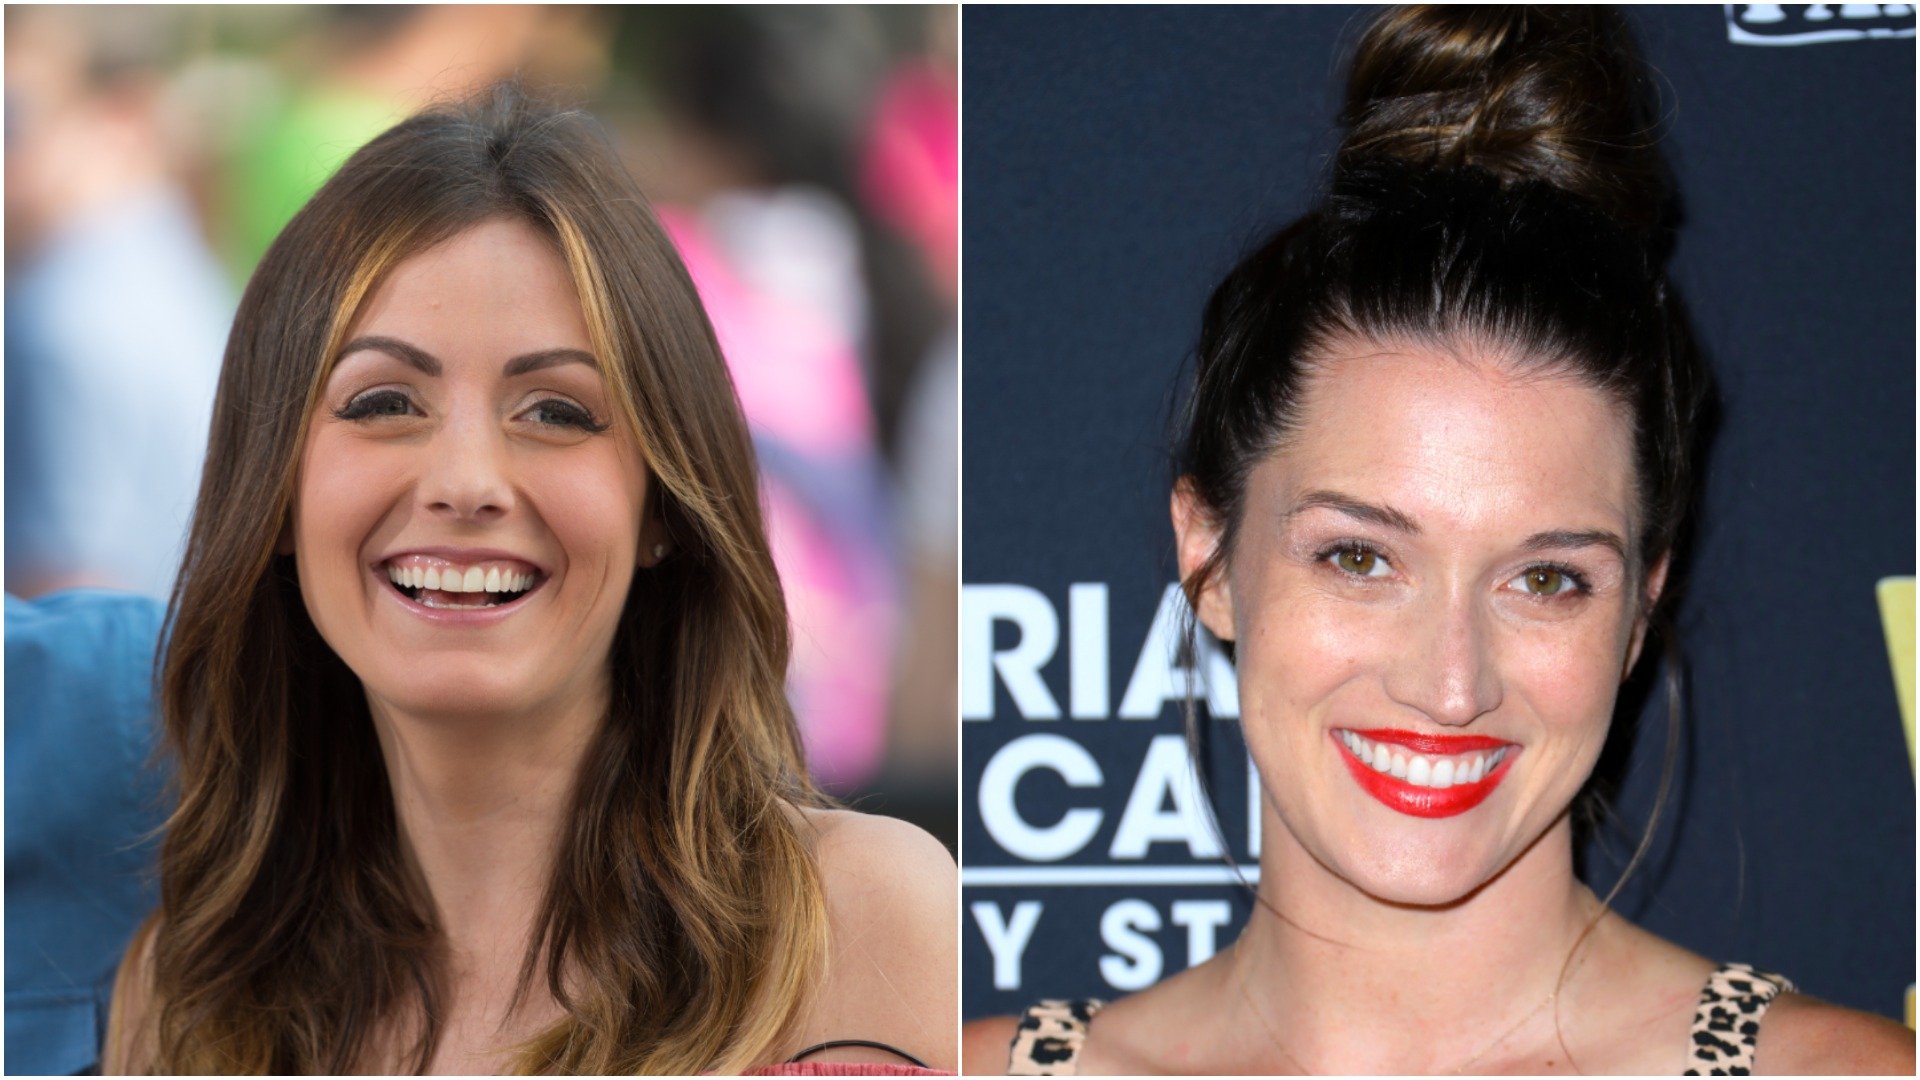 Carly Waddell and Jade Roper from 'Bachelor in Paradise' smiled during separate red carpet appearances